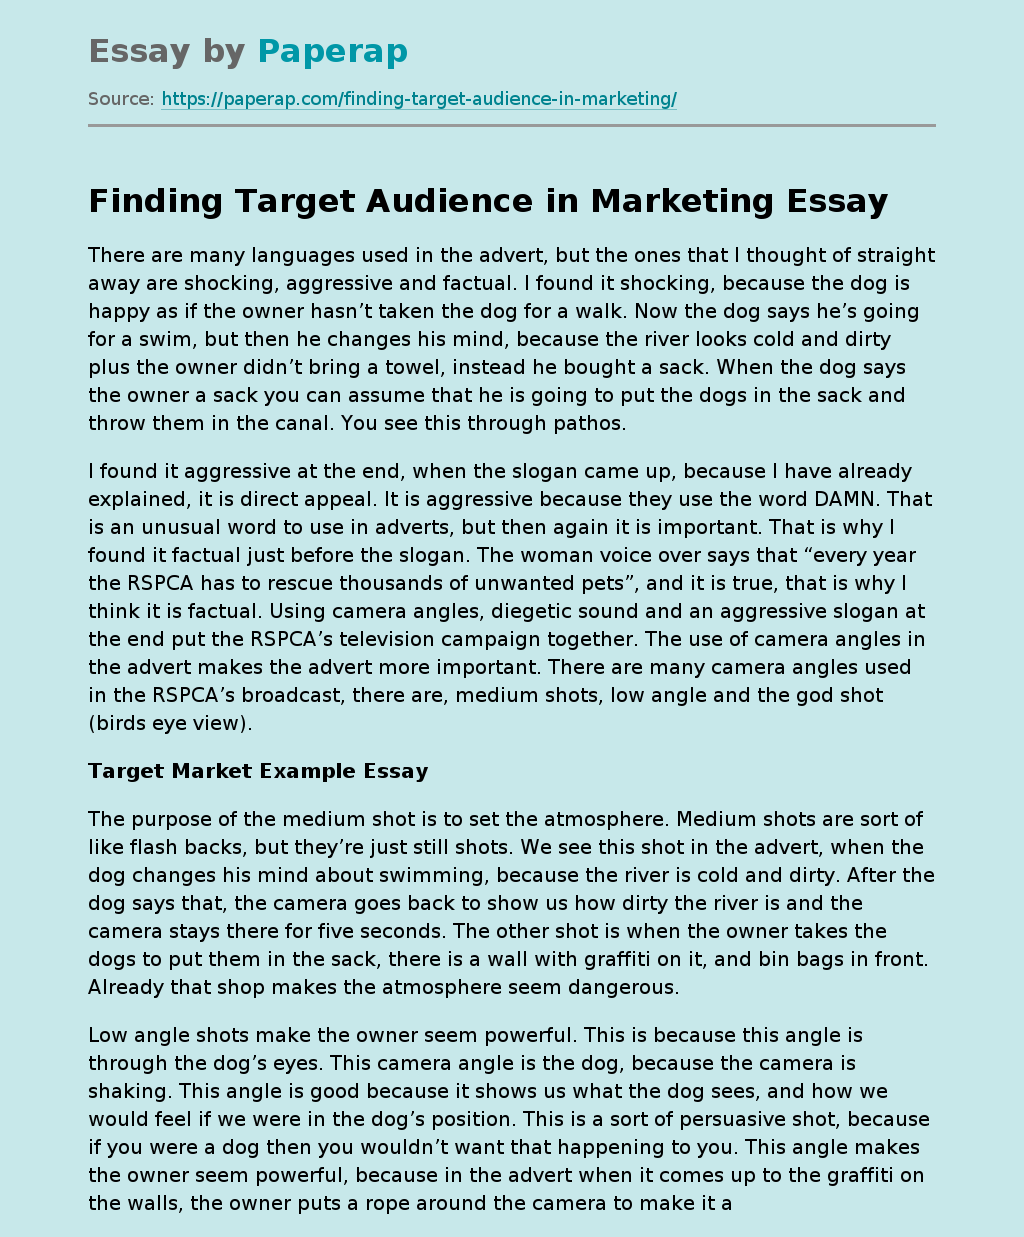 Finding Target Audience in Marketing